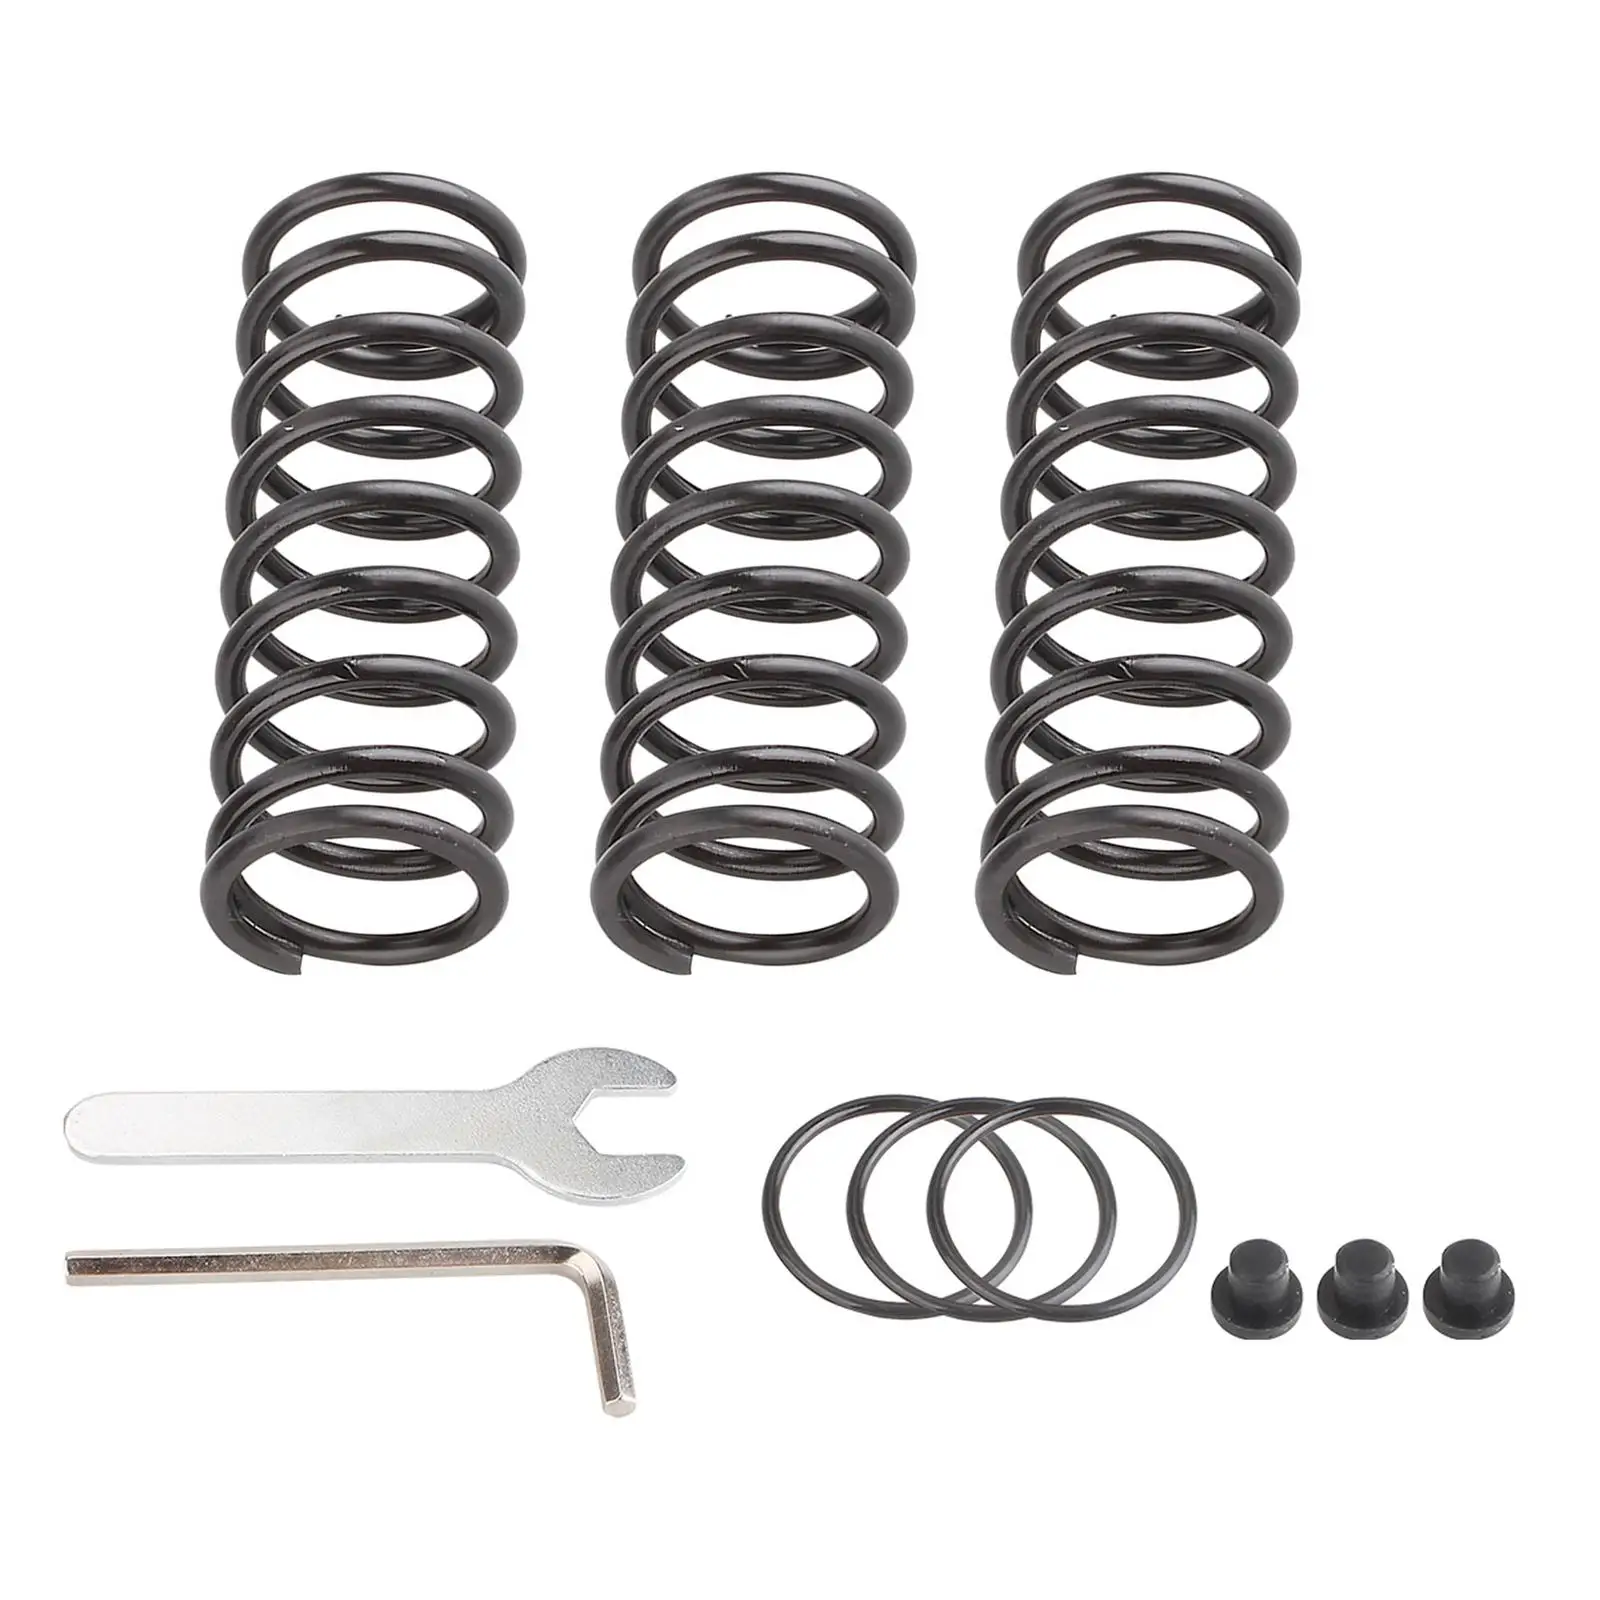 3x Pedal Spring Kit for G27 G29 G920 Accessories for Racing Wheel Easy to Install Professional Durable Throttle Clutch Upgrade